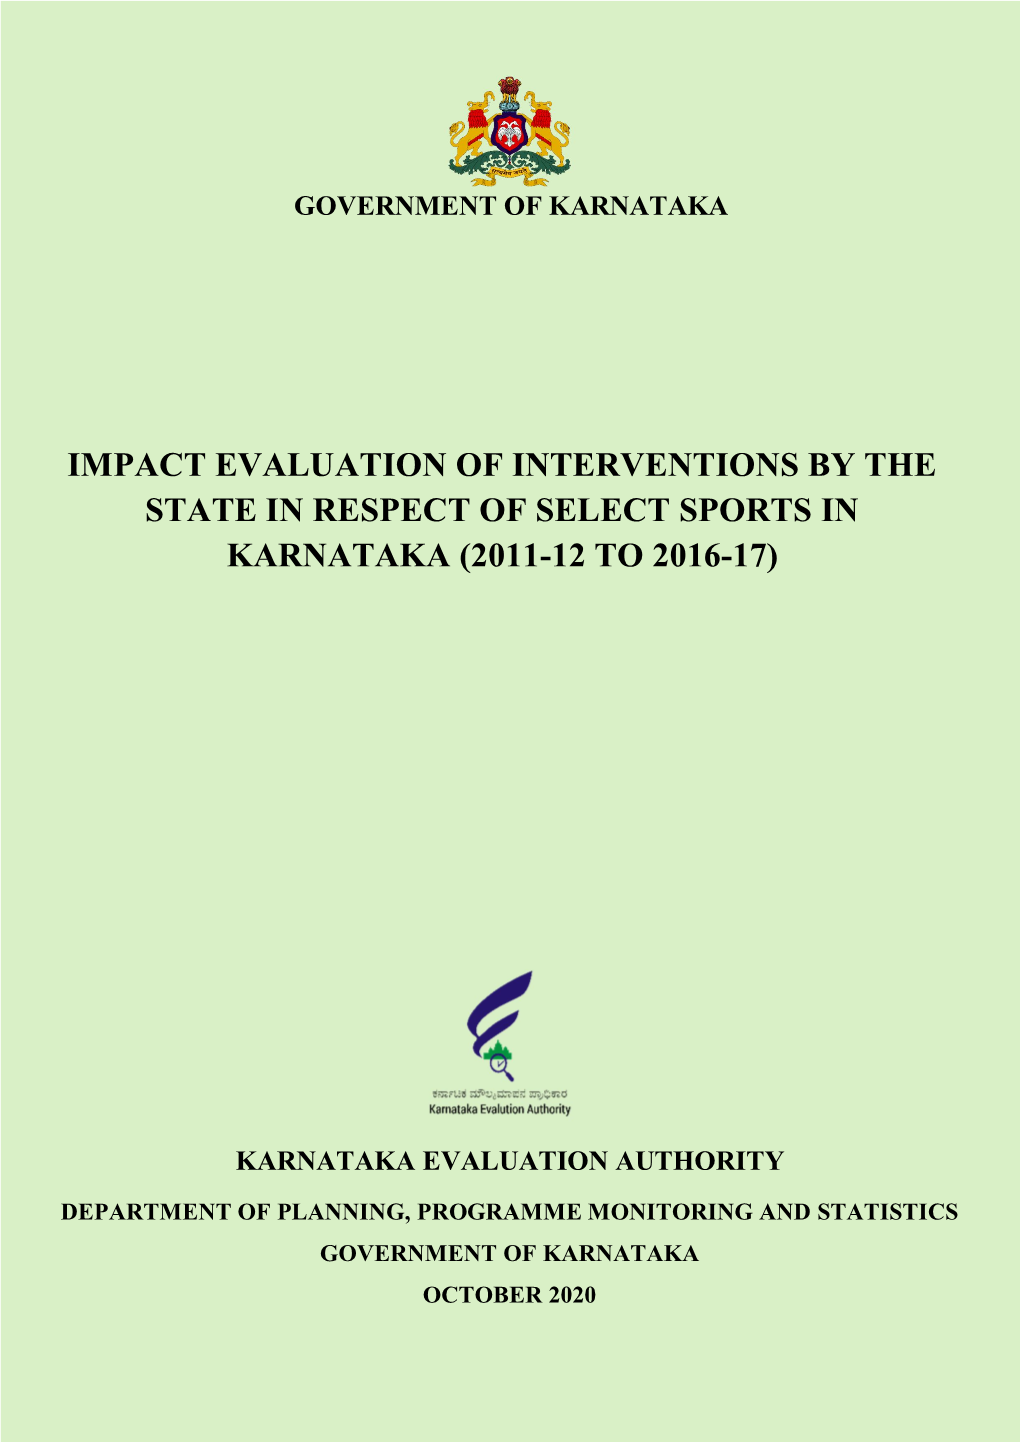 Impact Evaluation of Interventions by the State in Respect of Select Sports in Karnataka (2011-12 to 2016-17)